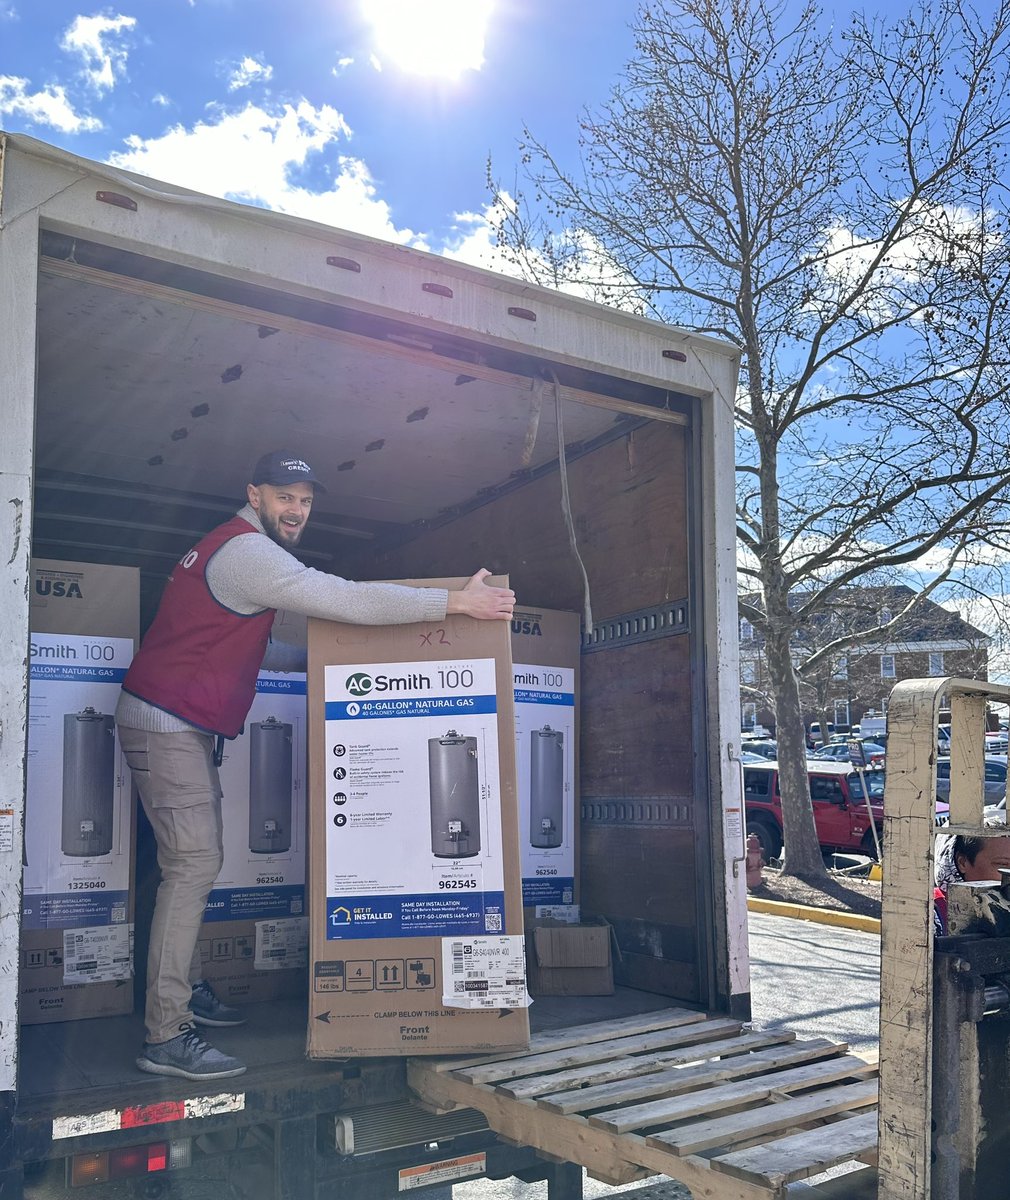 Andriy loading up a few (30) hot water tanks for a Pro customer here at our Gaithersburg Lowe’s! @BluBoxR1 @BenitoKomadina @zsanitta @DustinCornell5